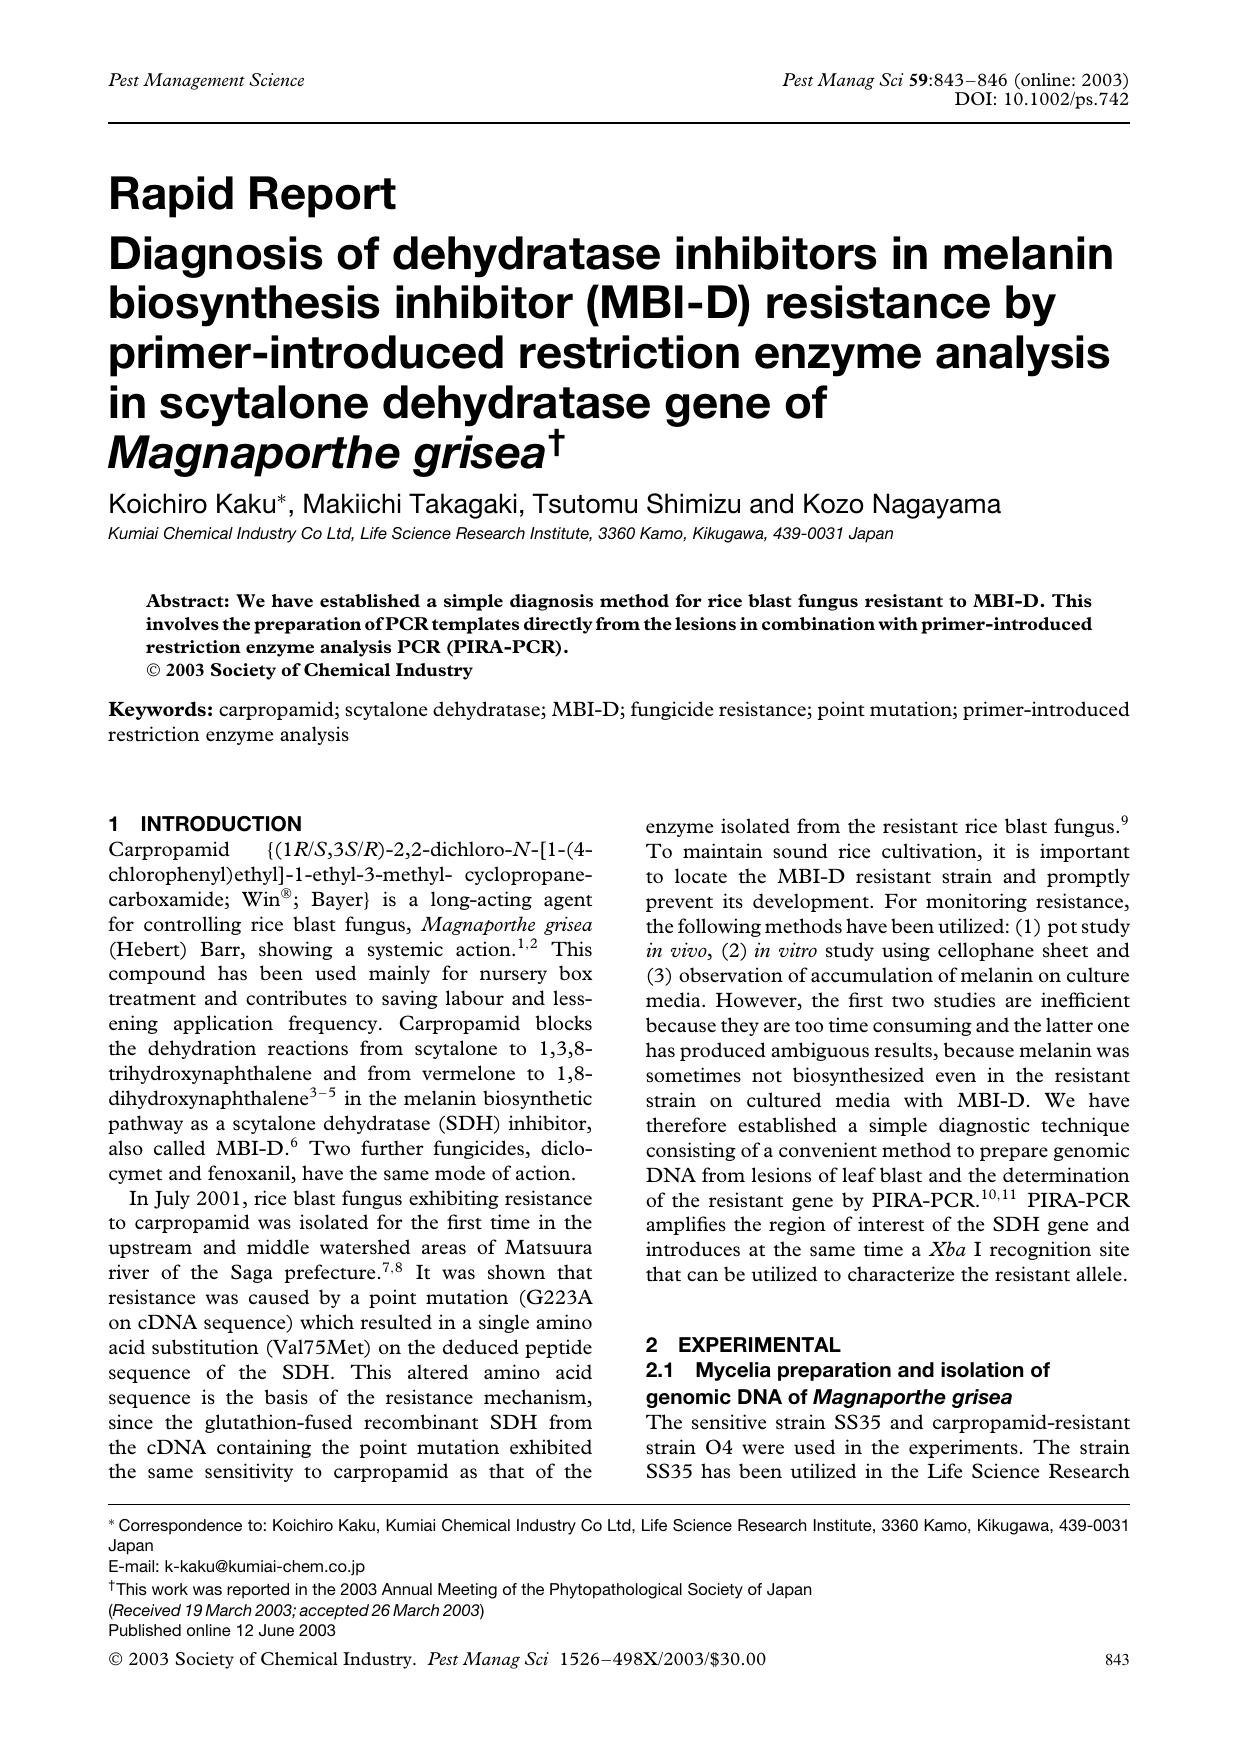 Diagnosis of dehydratase inhibitors in melanin biosynthesis inhibitor (MBI-D) resistance by primer-introduced restriction enzyme analysis in scytalone dehydratase gene of Magnaporthe grisea by Unknown